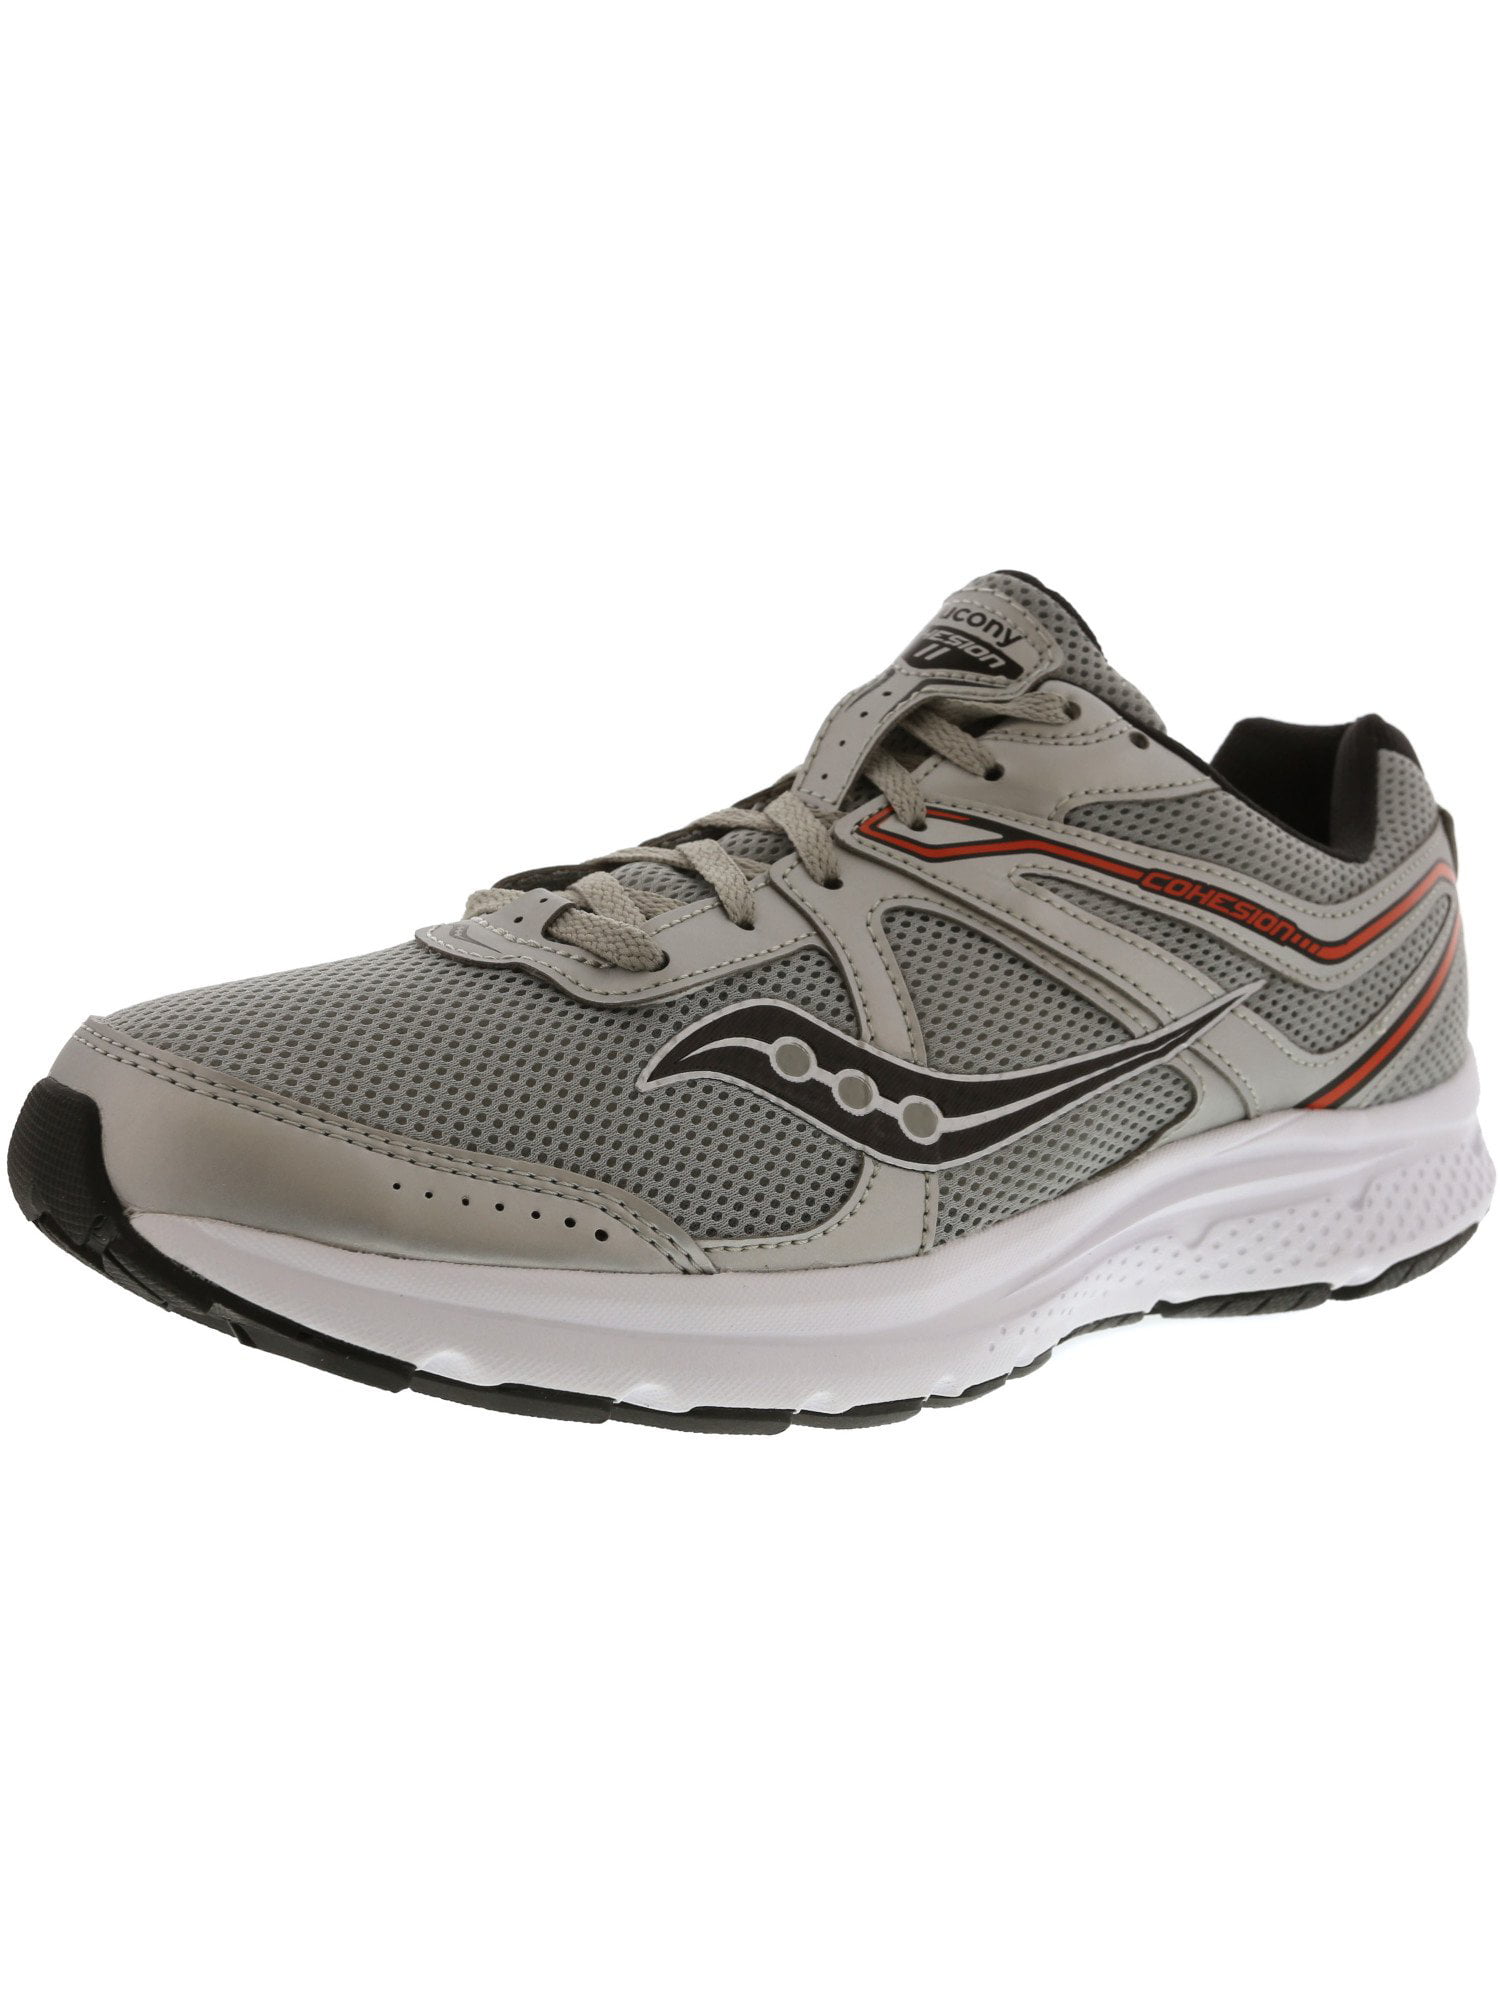 Saucony Men's Grid Cohesion Tr 11 Ankle-High Trail Runner 